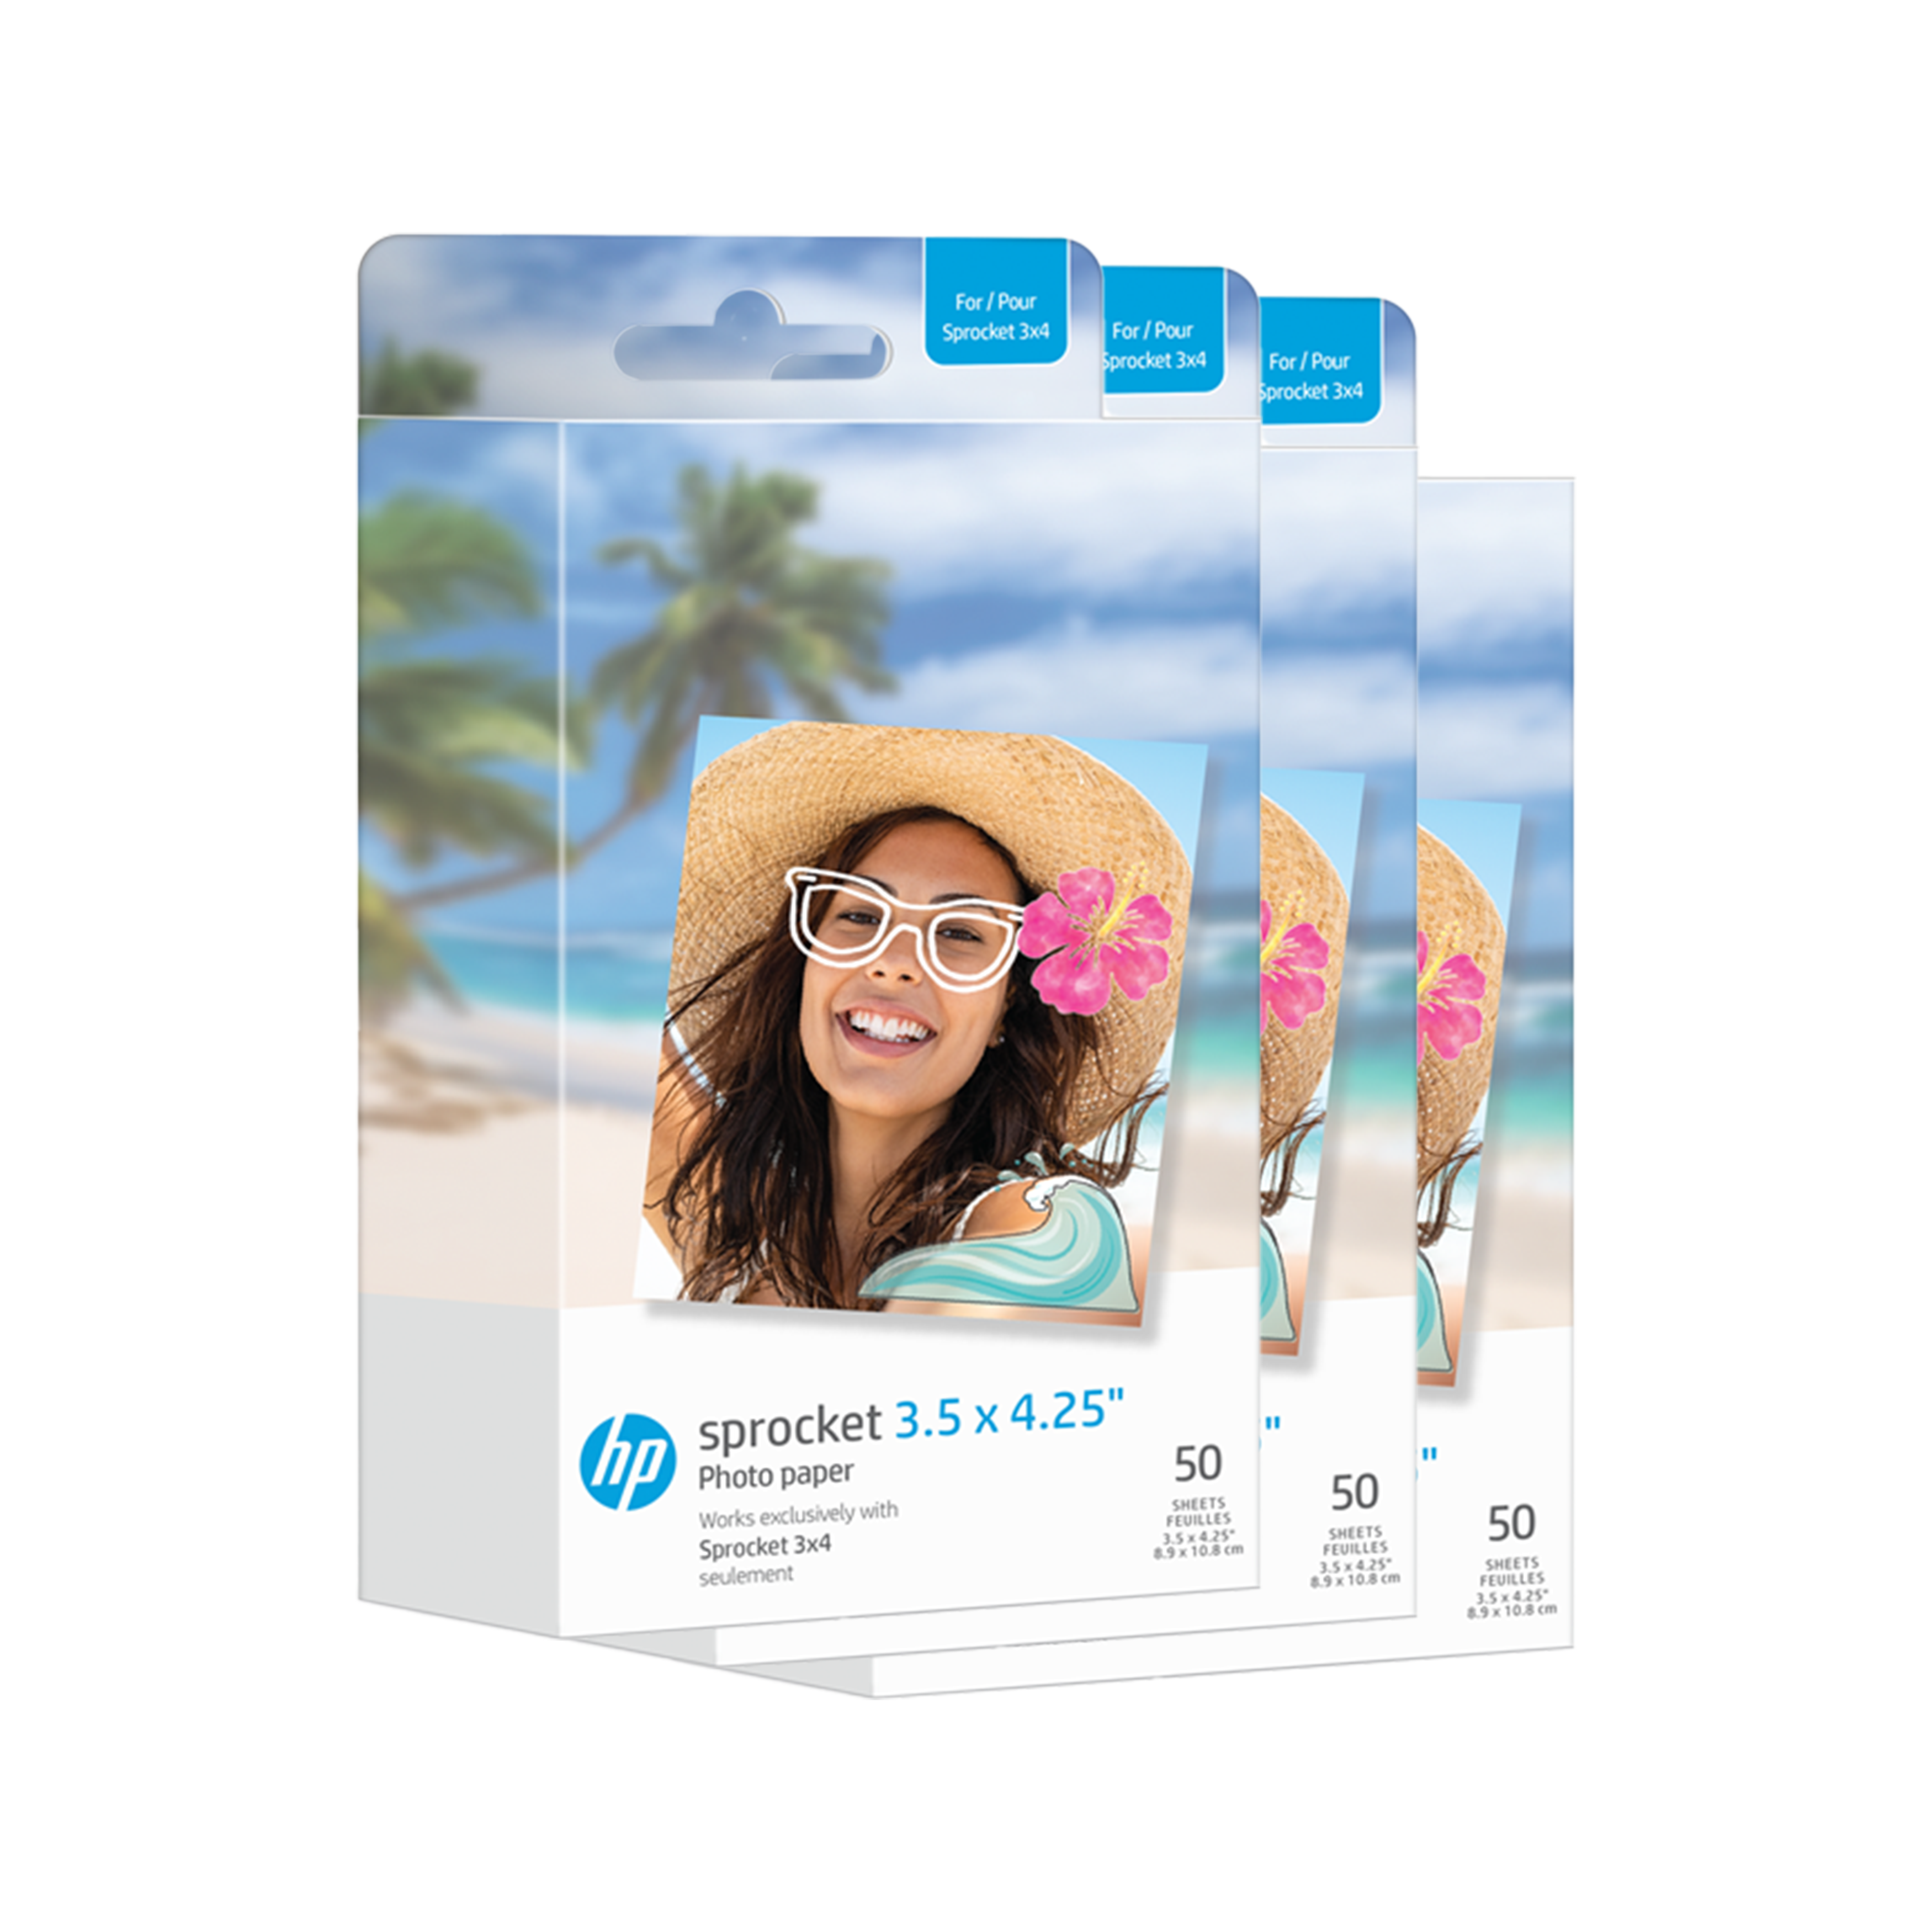 HP Sprocket 3.5 x 4.25” Zink Sticky-Backed Photo Paper (150 Pack) Compatible with HP Sprocket 3x4 Printer